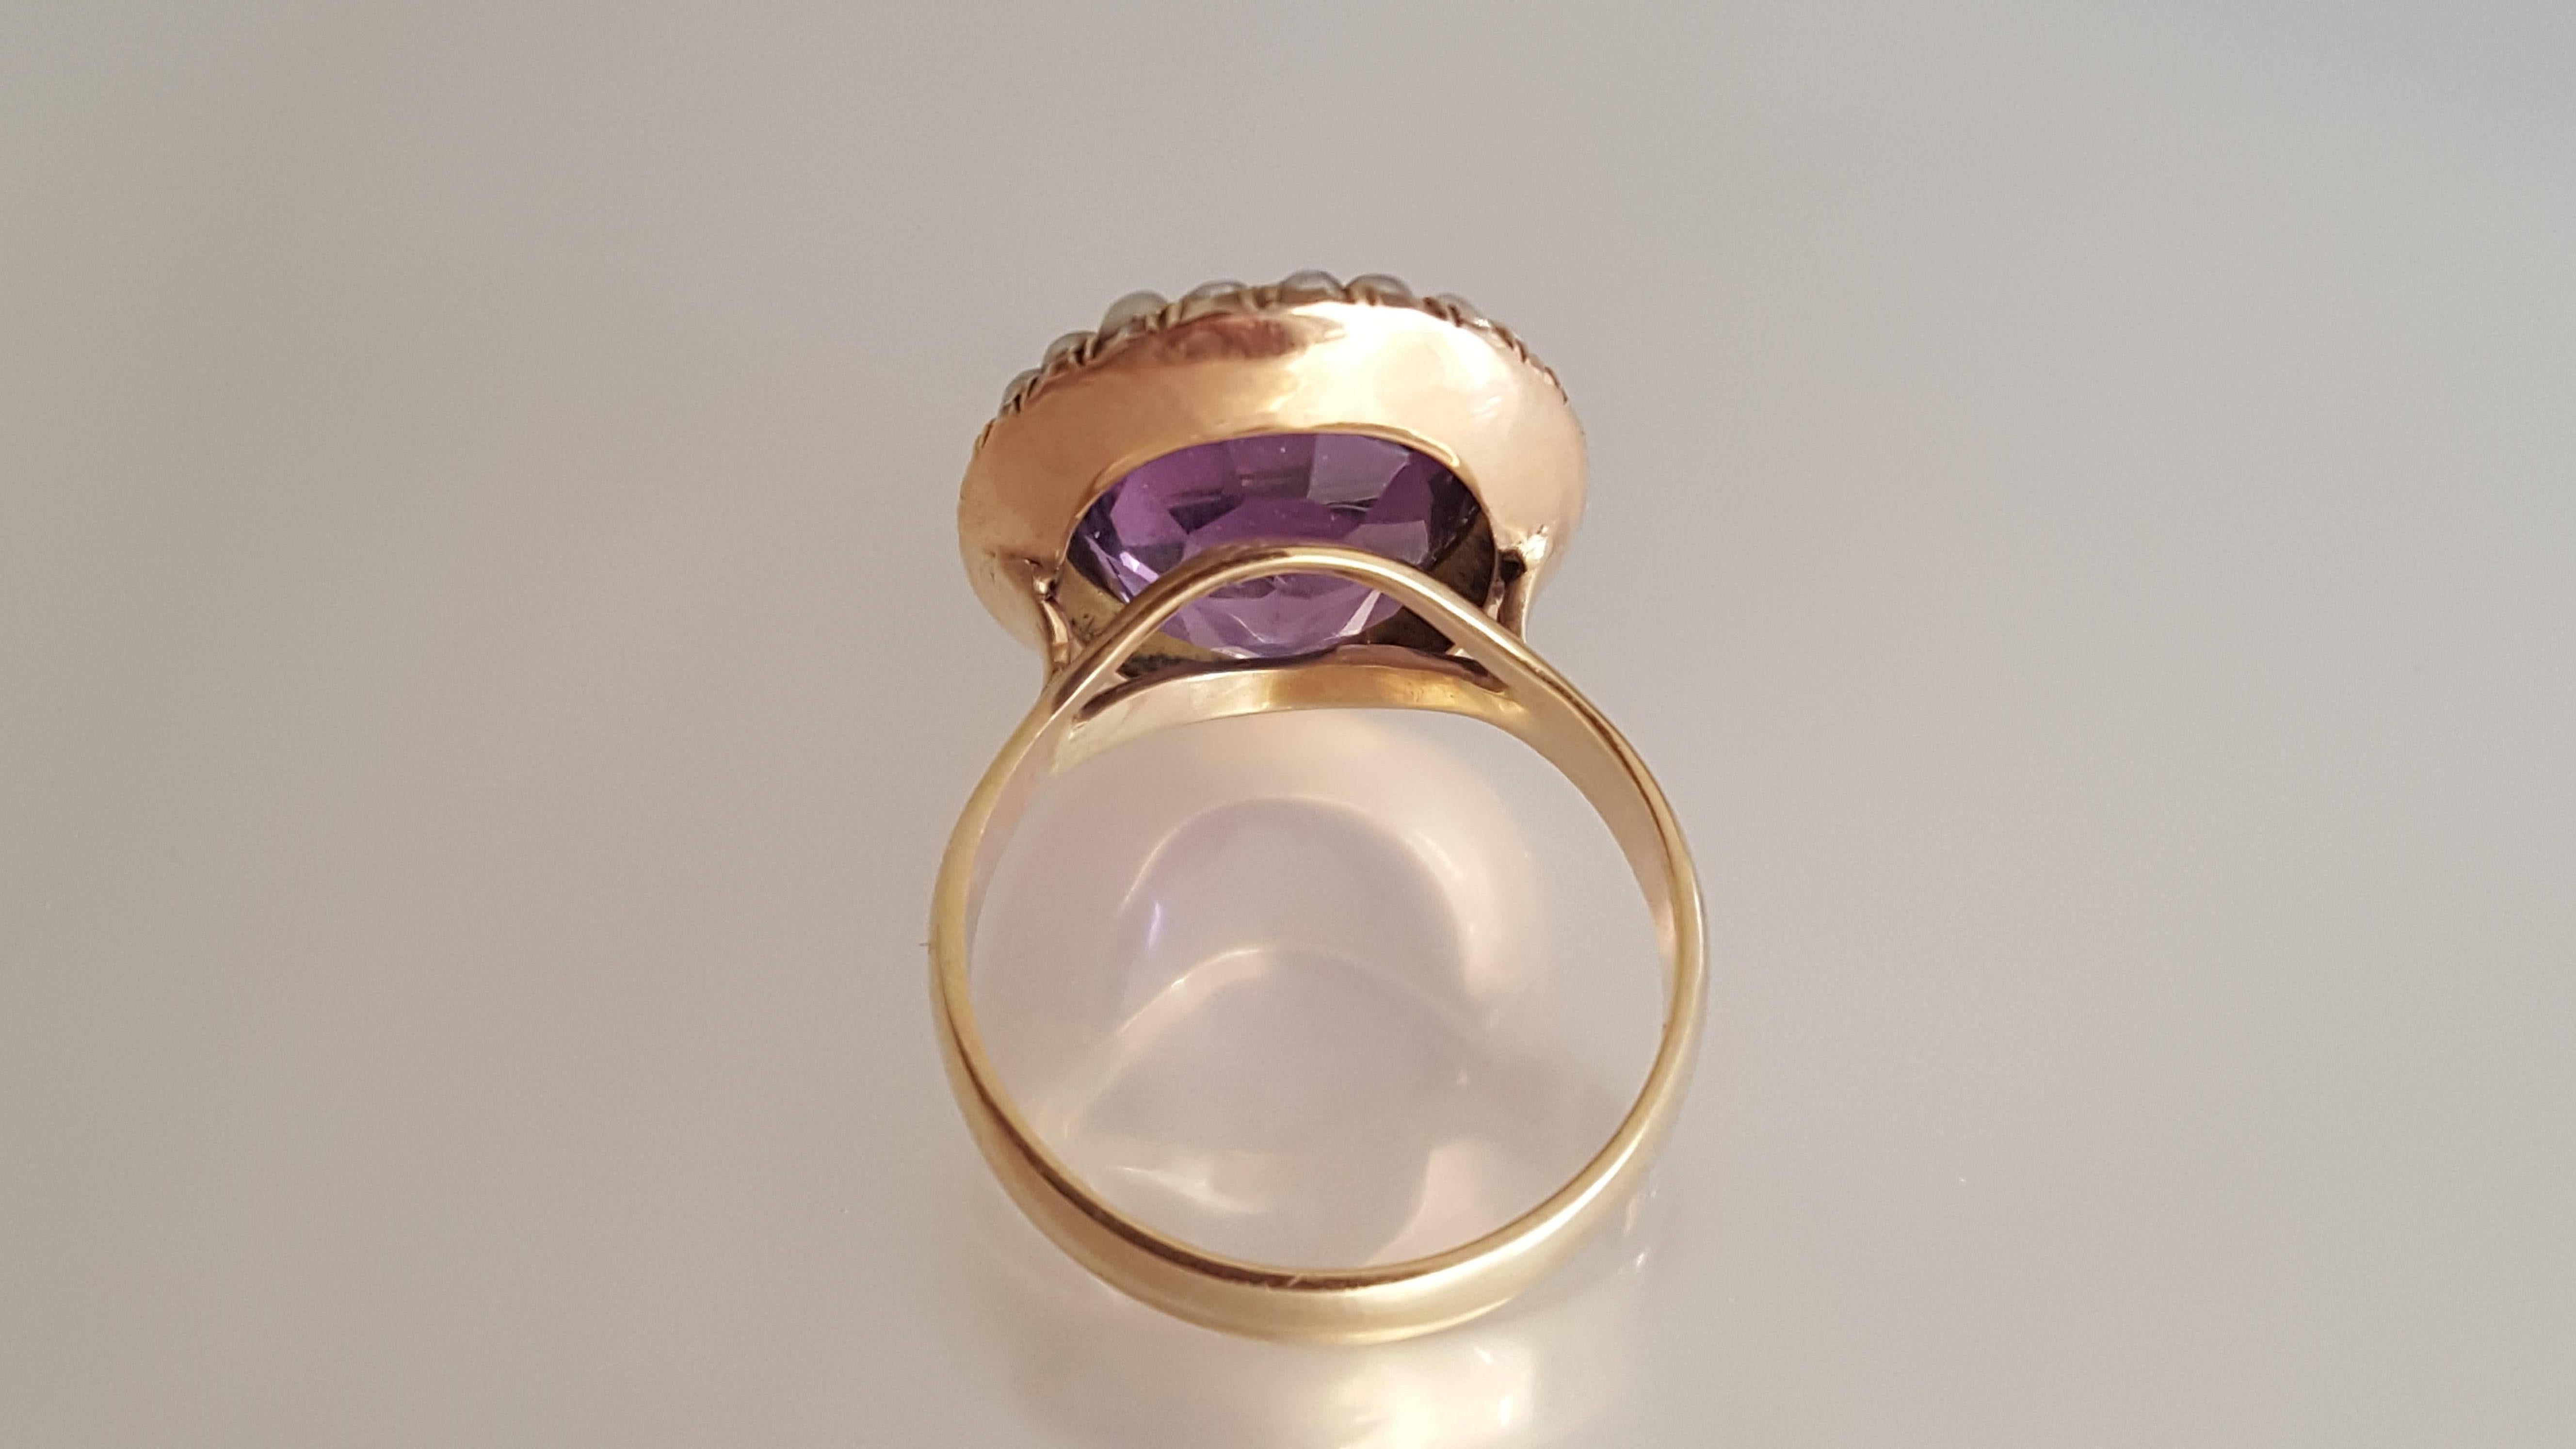 A Spectacular Antique Victorian c. 1890 9 Carat Gold Amethyst and split seed Pearl ring brooch conversion on 9 Carat Gold shank. English origin. 
Size M UK, 6.5 US.
Height of the face 21mm 
Width 15mm
Excellent condition and ready to wear. 